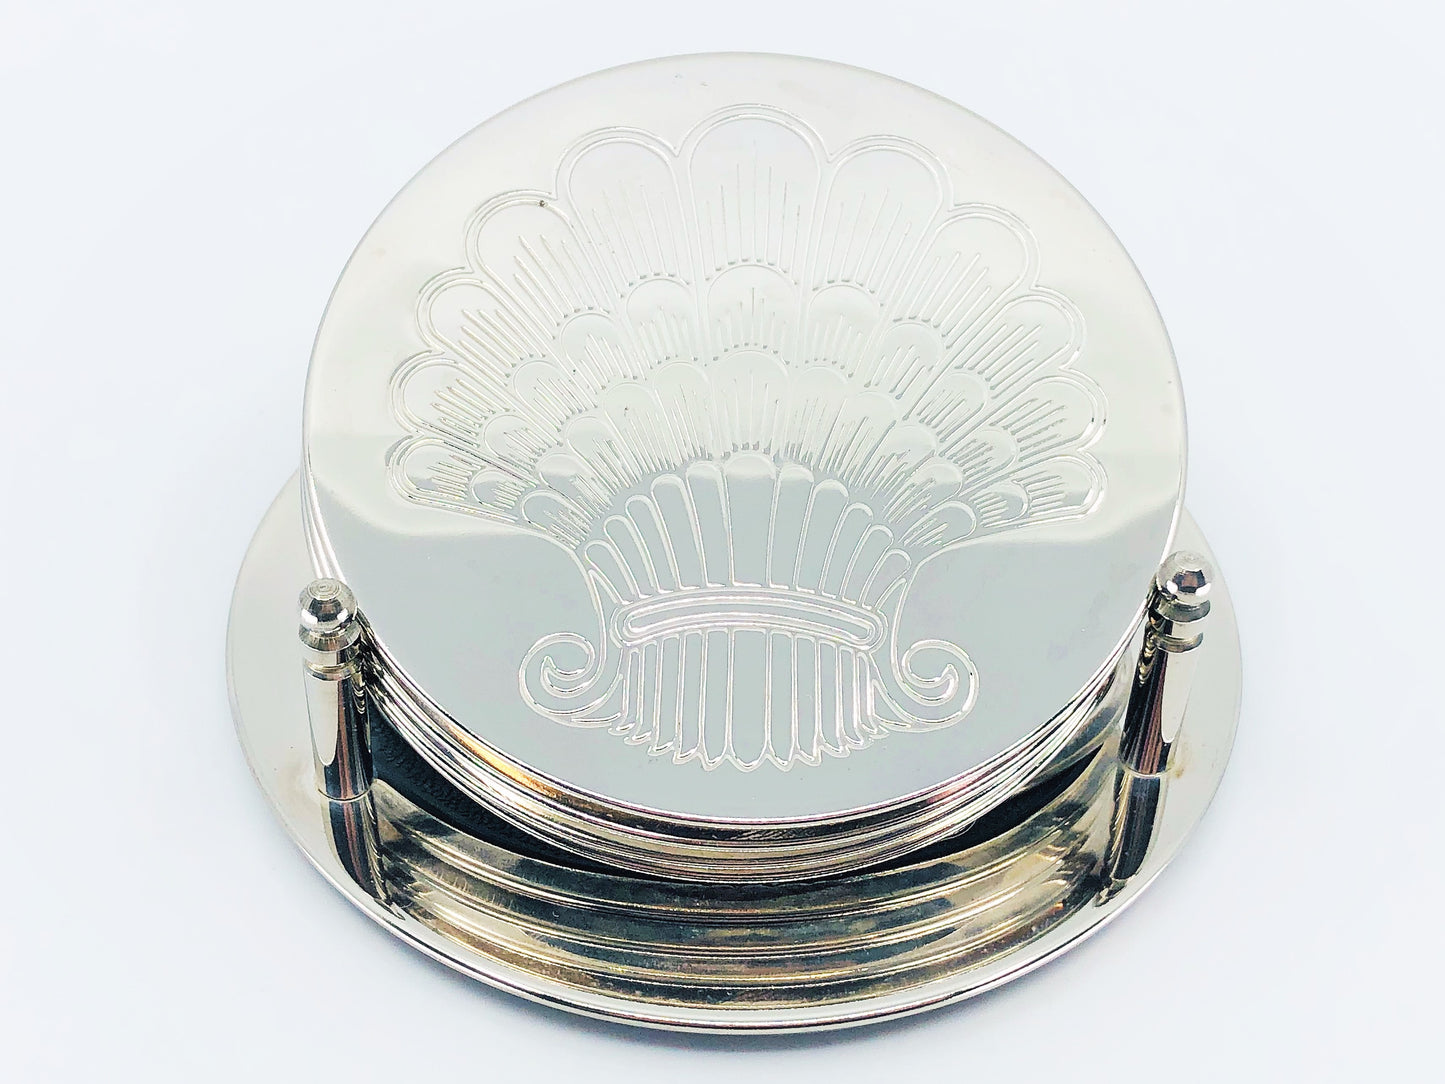 Vintage Silver Plate Coaster Set With Matching Holder - Set of 5